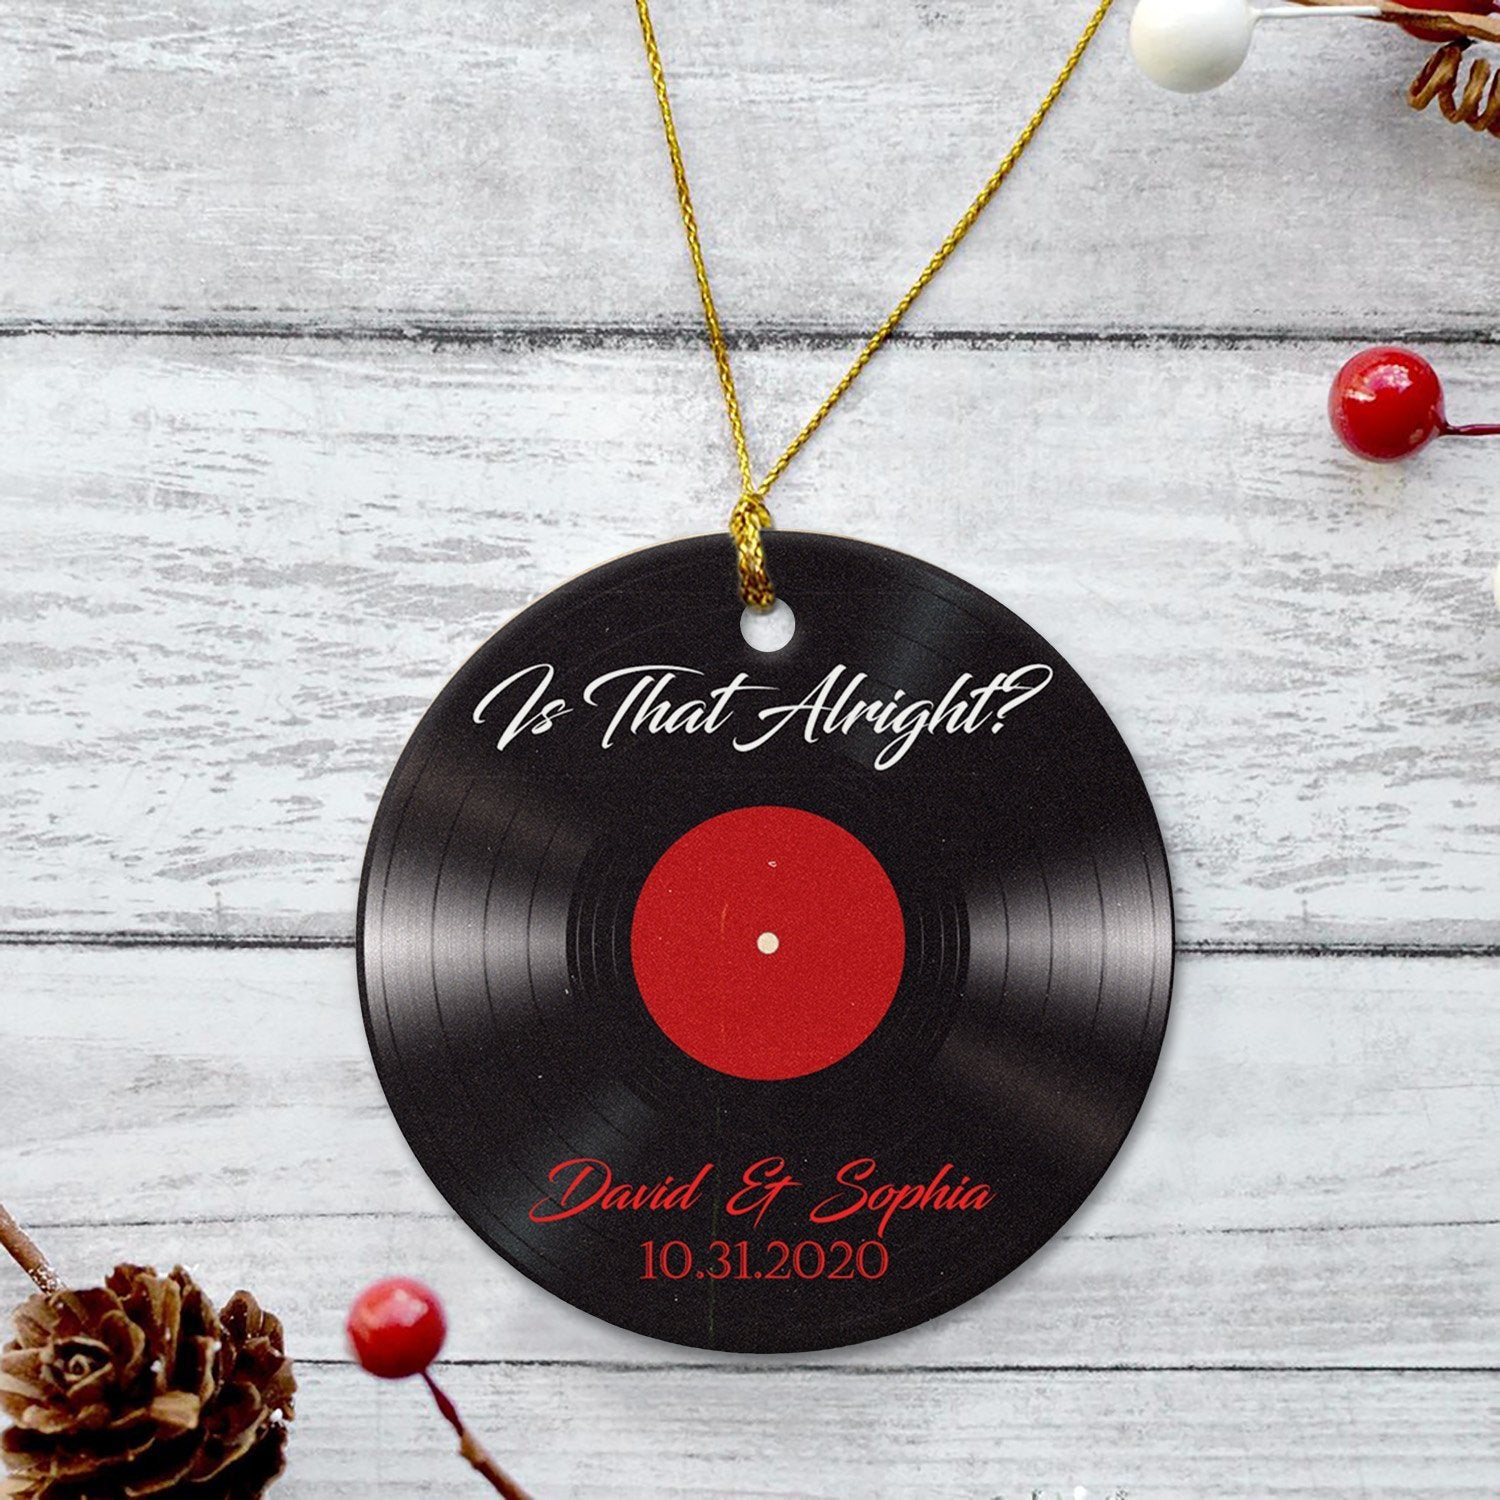 Custom Christmas Circle Ornament 2 Sided, Personalized Name And Date, Vinyl Record